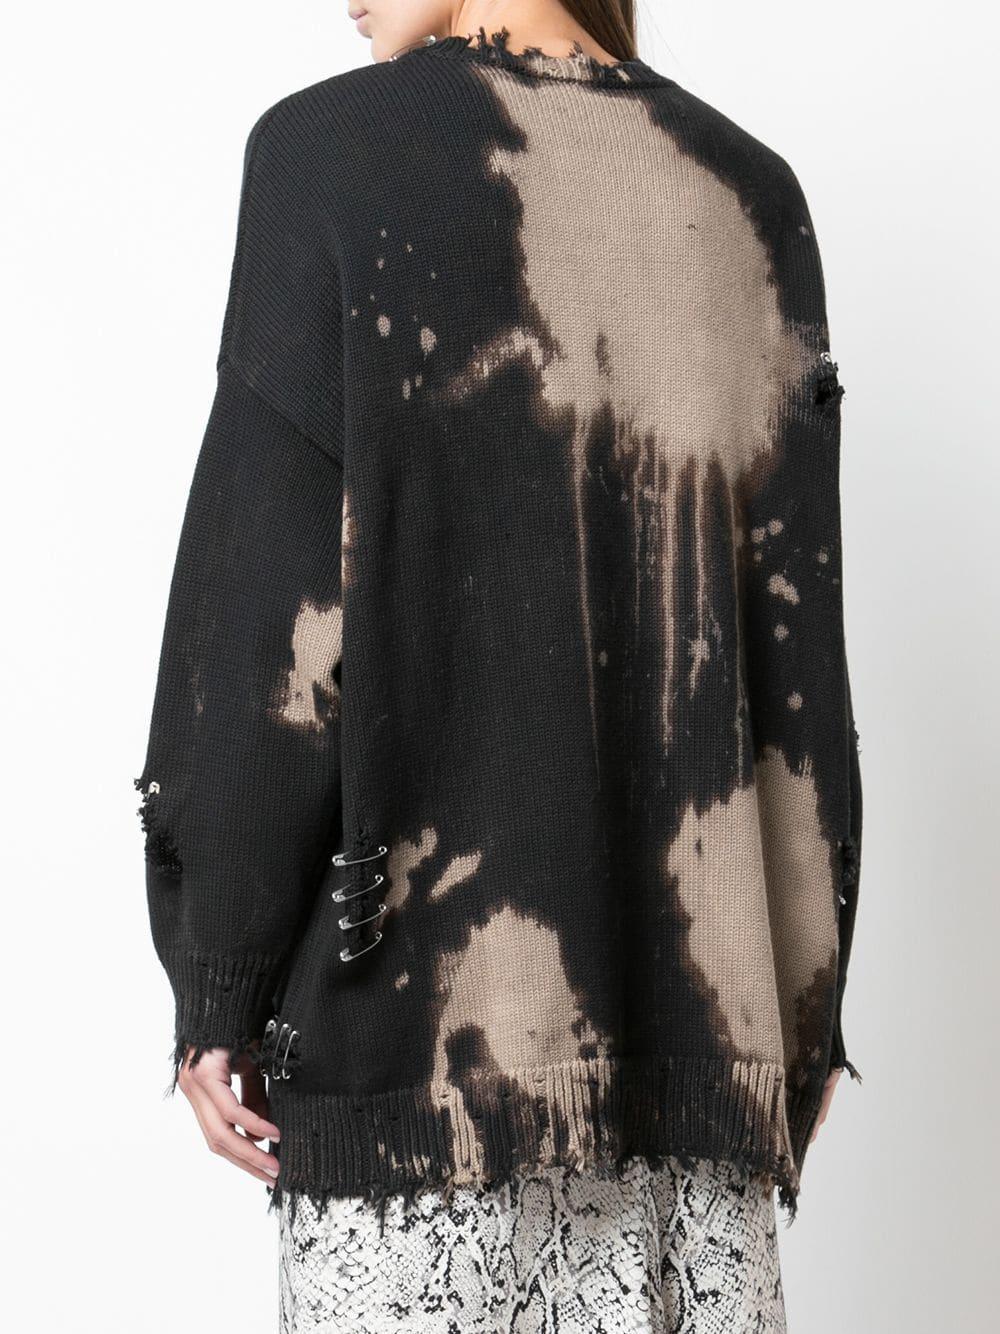 R13 Cotton Distressed Bleached Sweater in Black - Lyst